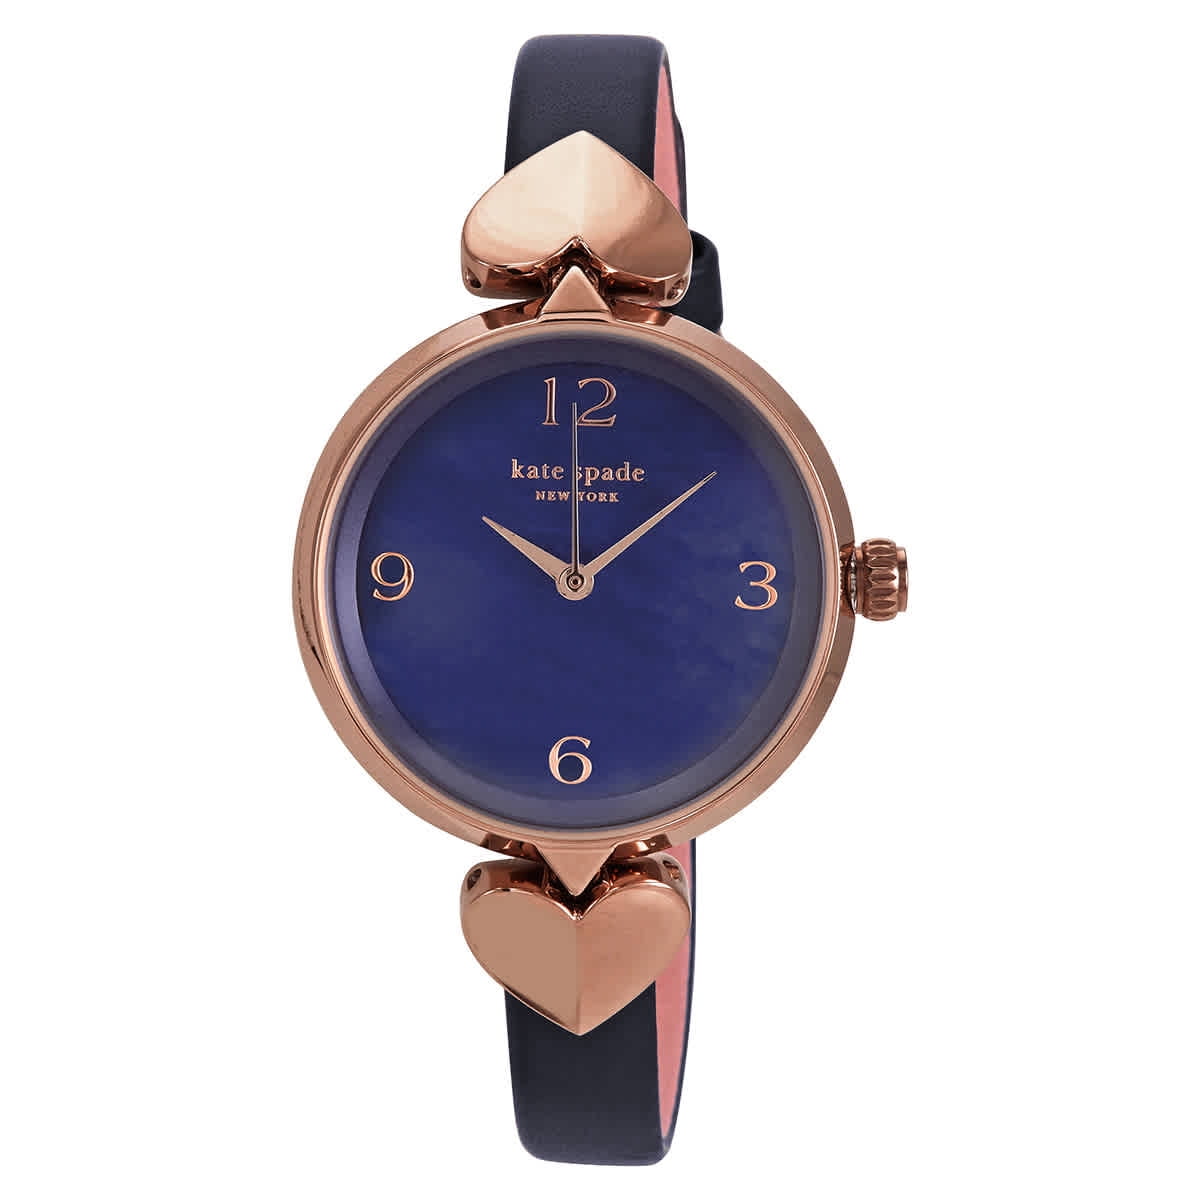 Kate Spade Women's New York Hollis Navy Watch with Leather Strap -  